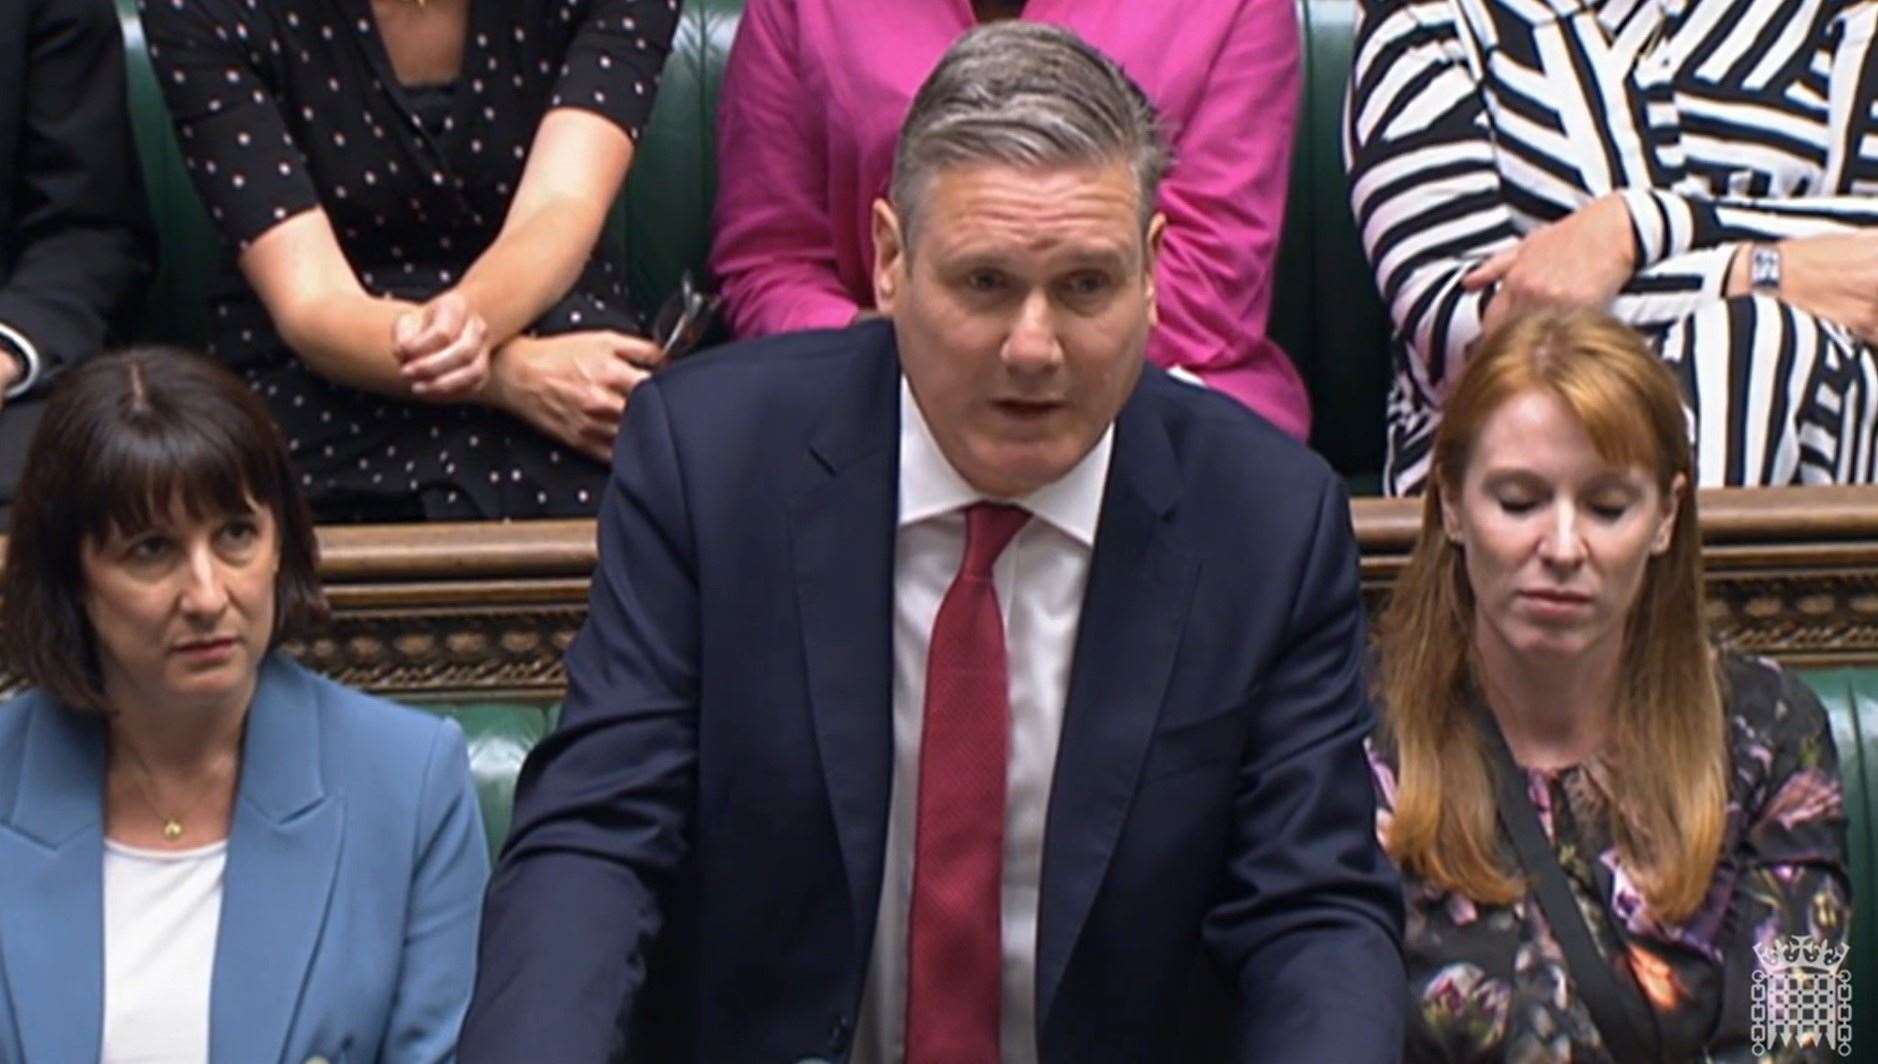 Sir Keir Starmer’s party was compared with the Government by the SNP member (House of Commons/PA)